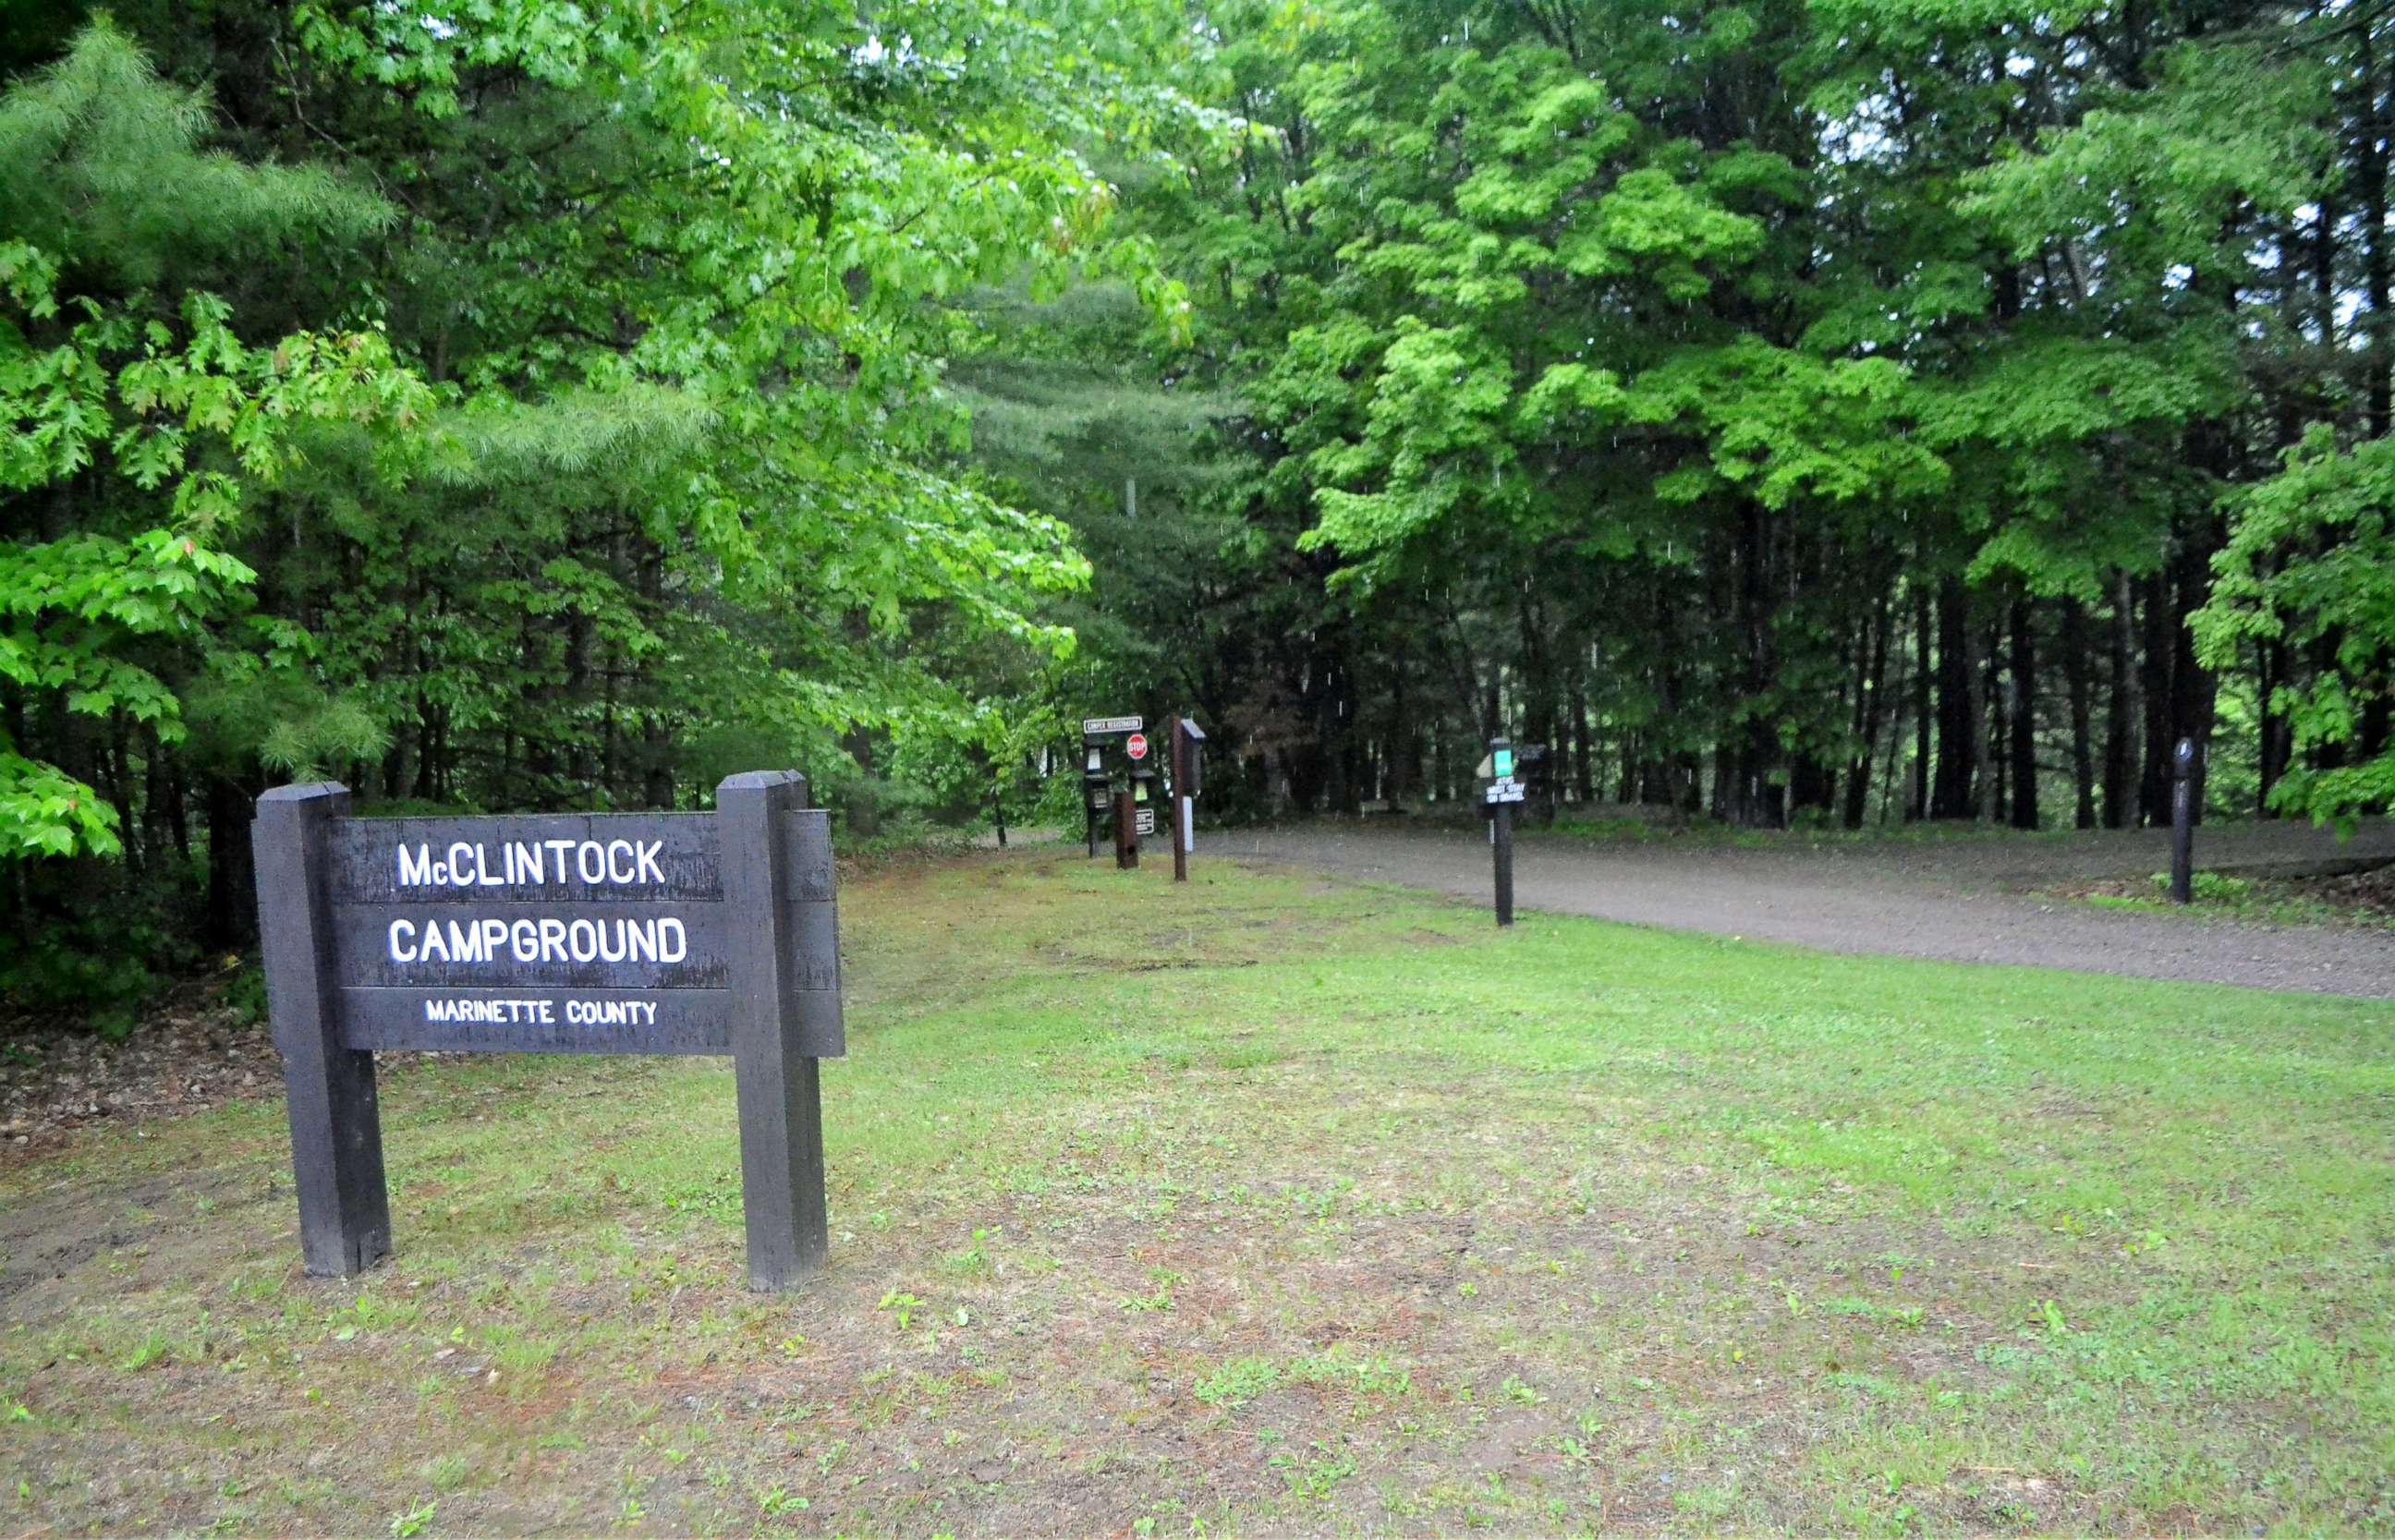 PHOTO: The entrance to the campground in McClintock Park in the Marinette County town of Silver Cliff, where David Schuldes and Ellen Matheys were shot to death on July 9, 1976.